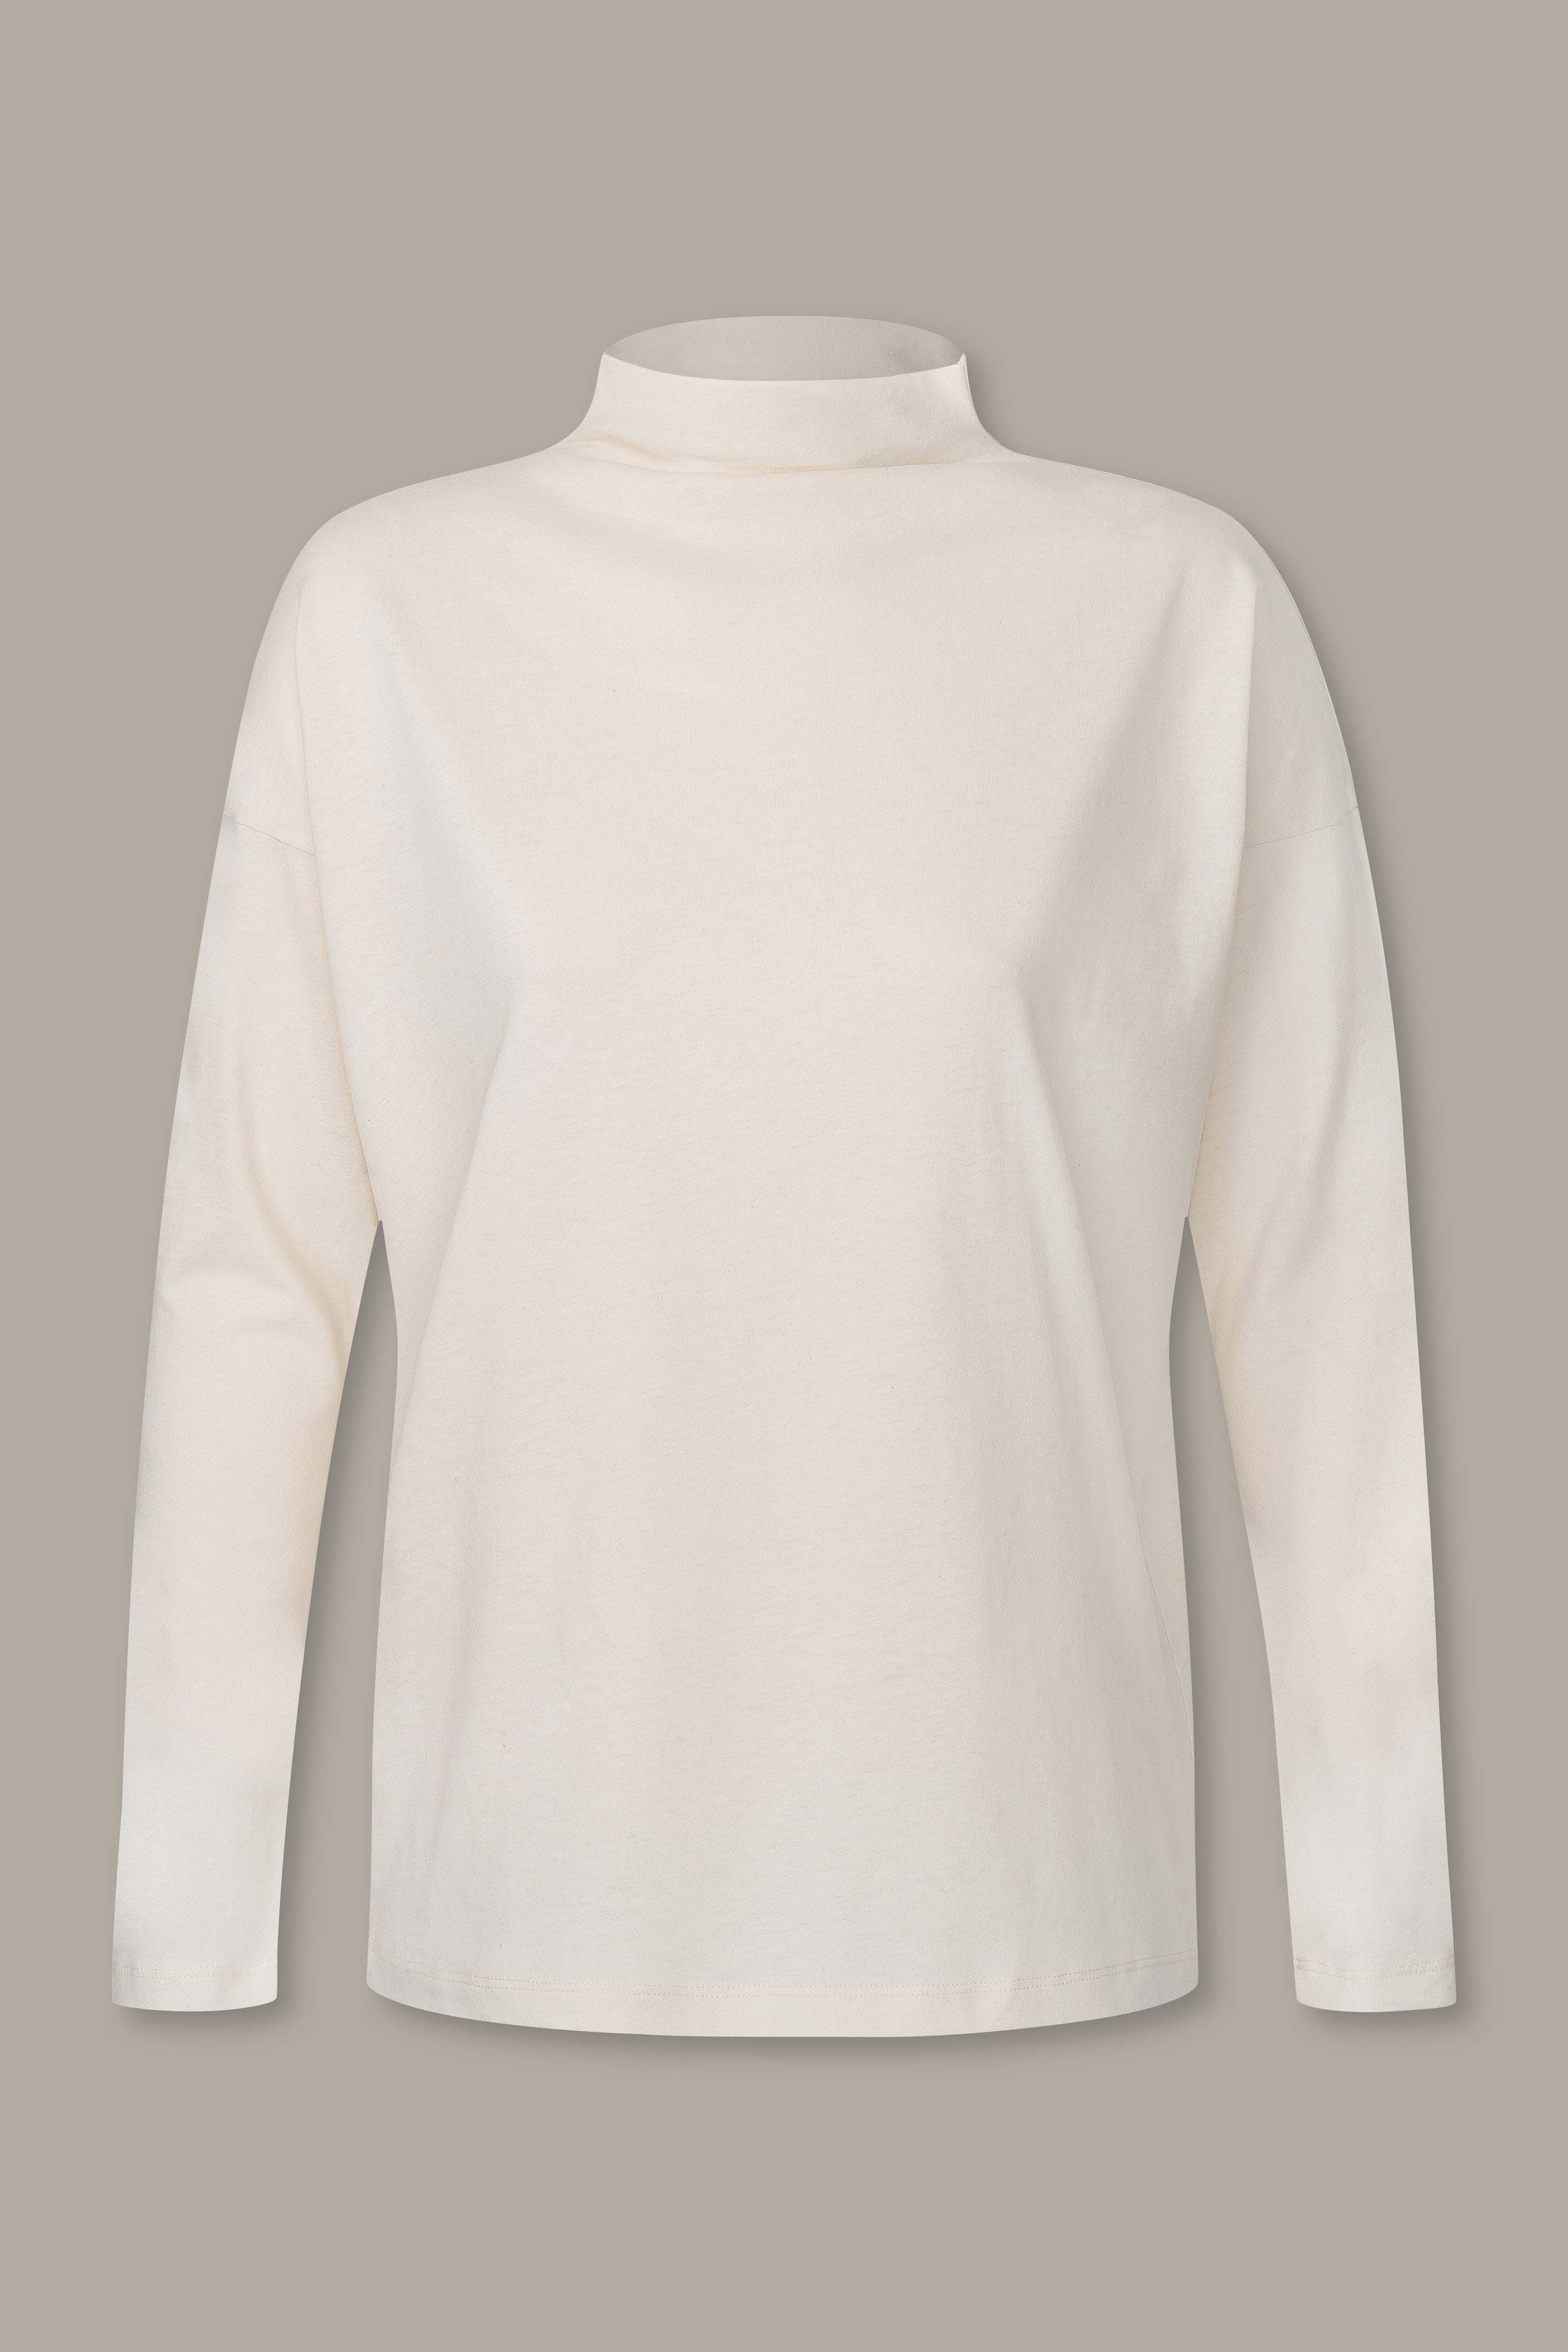 Cashmere mix shirt with a small stand-up collar